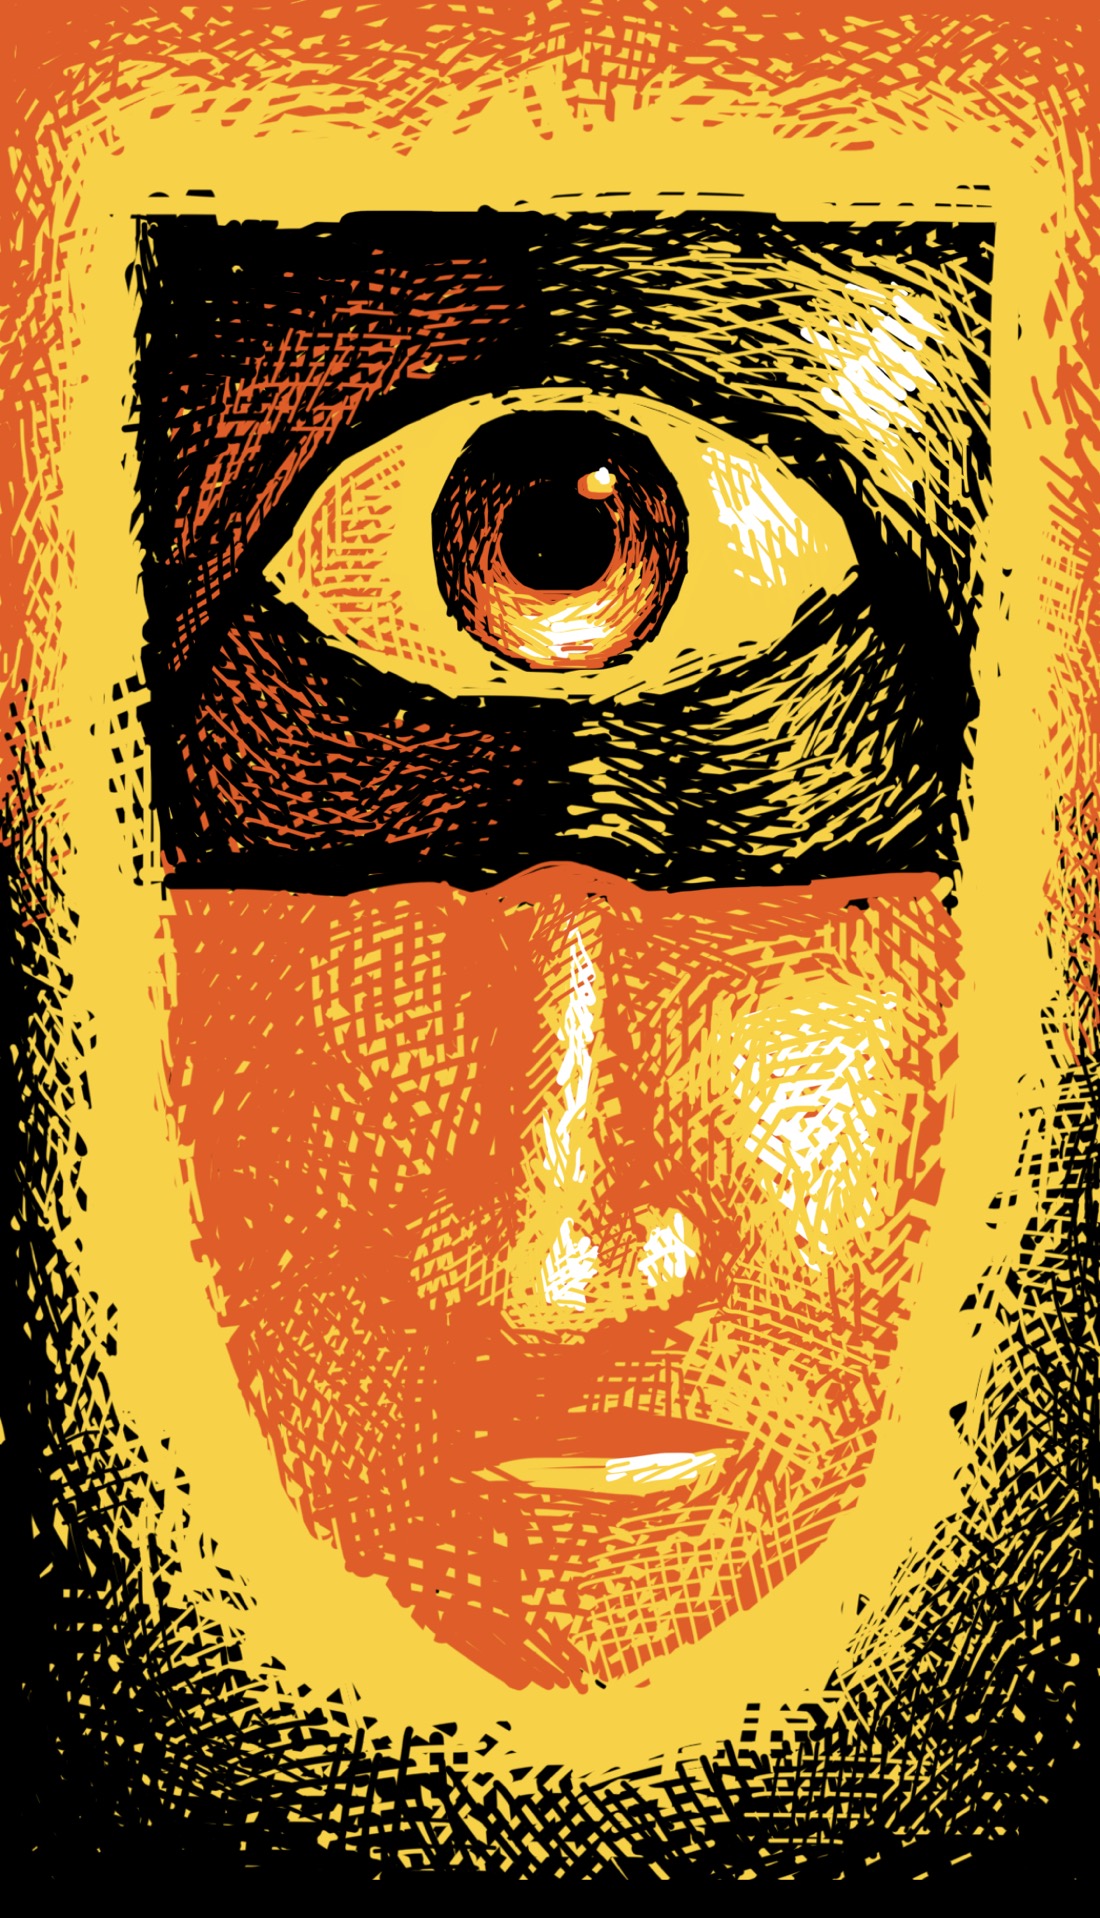 A face shaped like a tall shield: flat on top, with a curved, pointed bottom. The top half of the face is occupied by a single eye on a dark, textured background, roughly suggestive of a Cyclops wearing a leather mask. The lower half of the face is red and ordinary looking: nose, closed mouth. Surrounding the face is a textured gradient. The colors of the gradient are the inverse of the face: a red gradient on the top, a black gradient below.